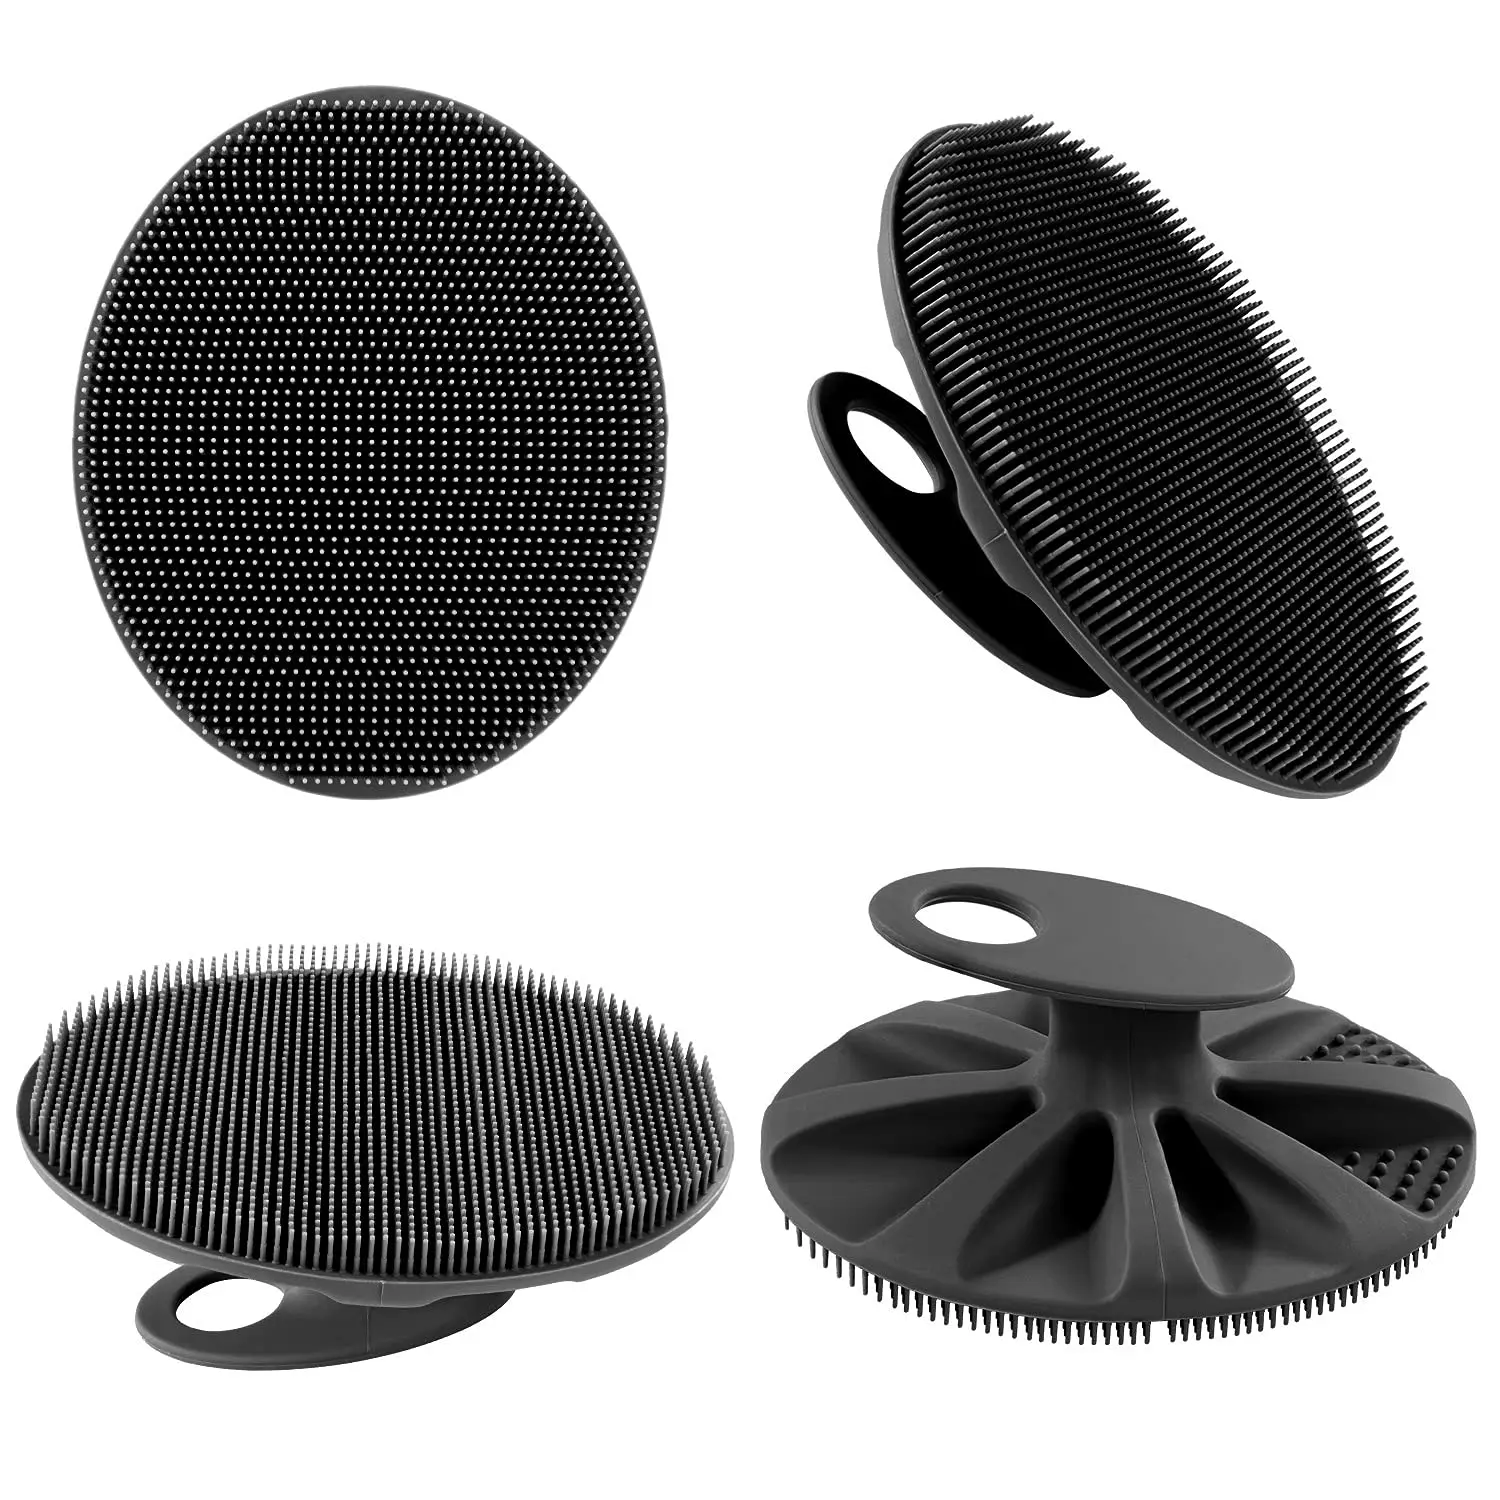 https://ae01.alicdn.com/kf/S1f860aec477549bf989831f4074f43c7x/Food-Grade-Soft-Silicone-Body-Cleansing-Brush-Shower-Scrubber-Gentle-Exfoliating-and-Massage-for-All-Kinds.jpg